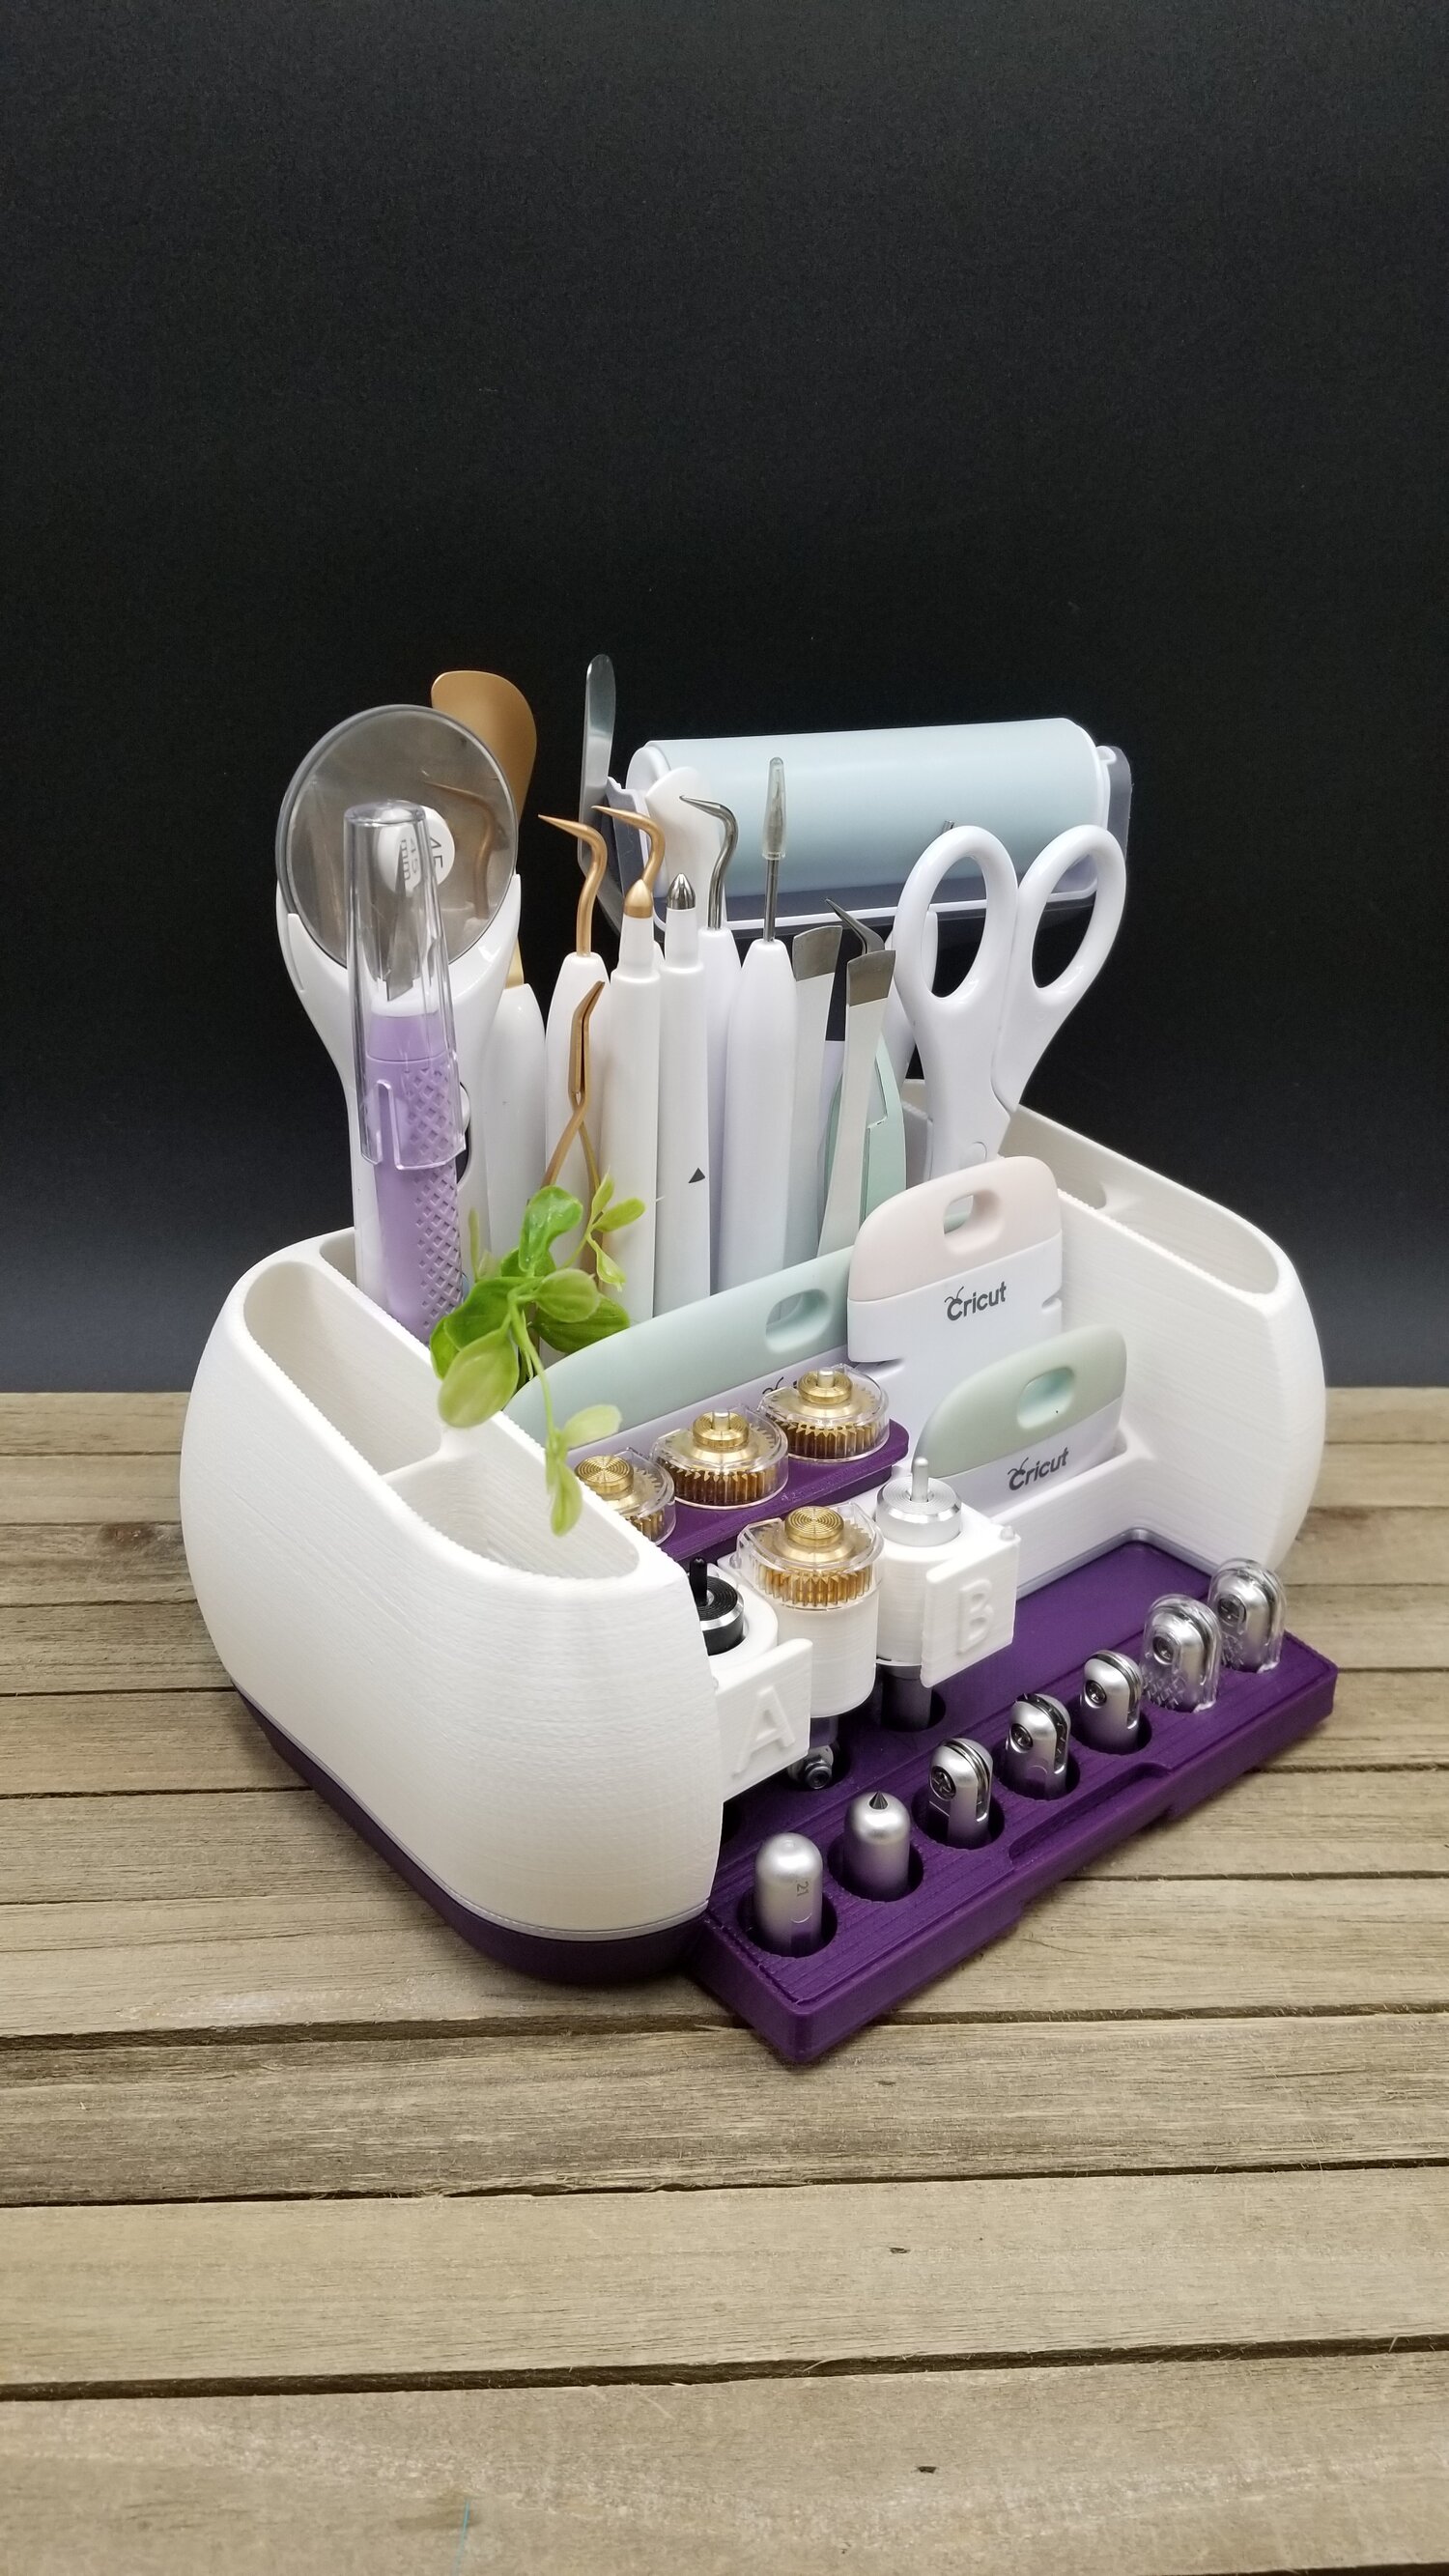 Tool Holder for Cricut Tool and Blades Designed by Jennifer Maker 3D  Printed Cutting Machine Tool Holder 